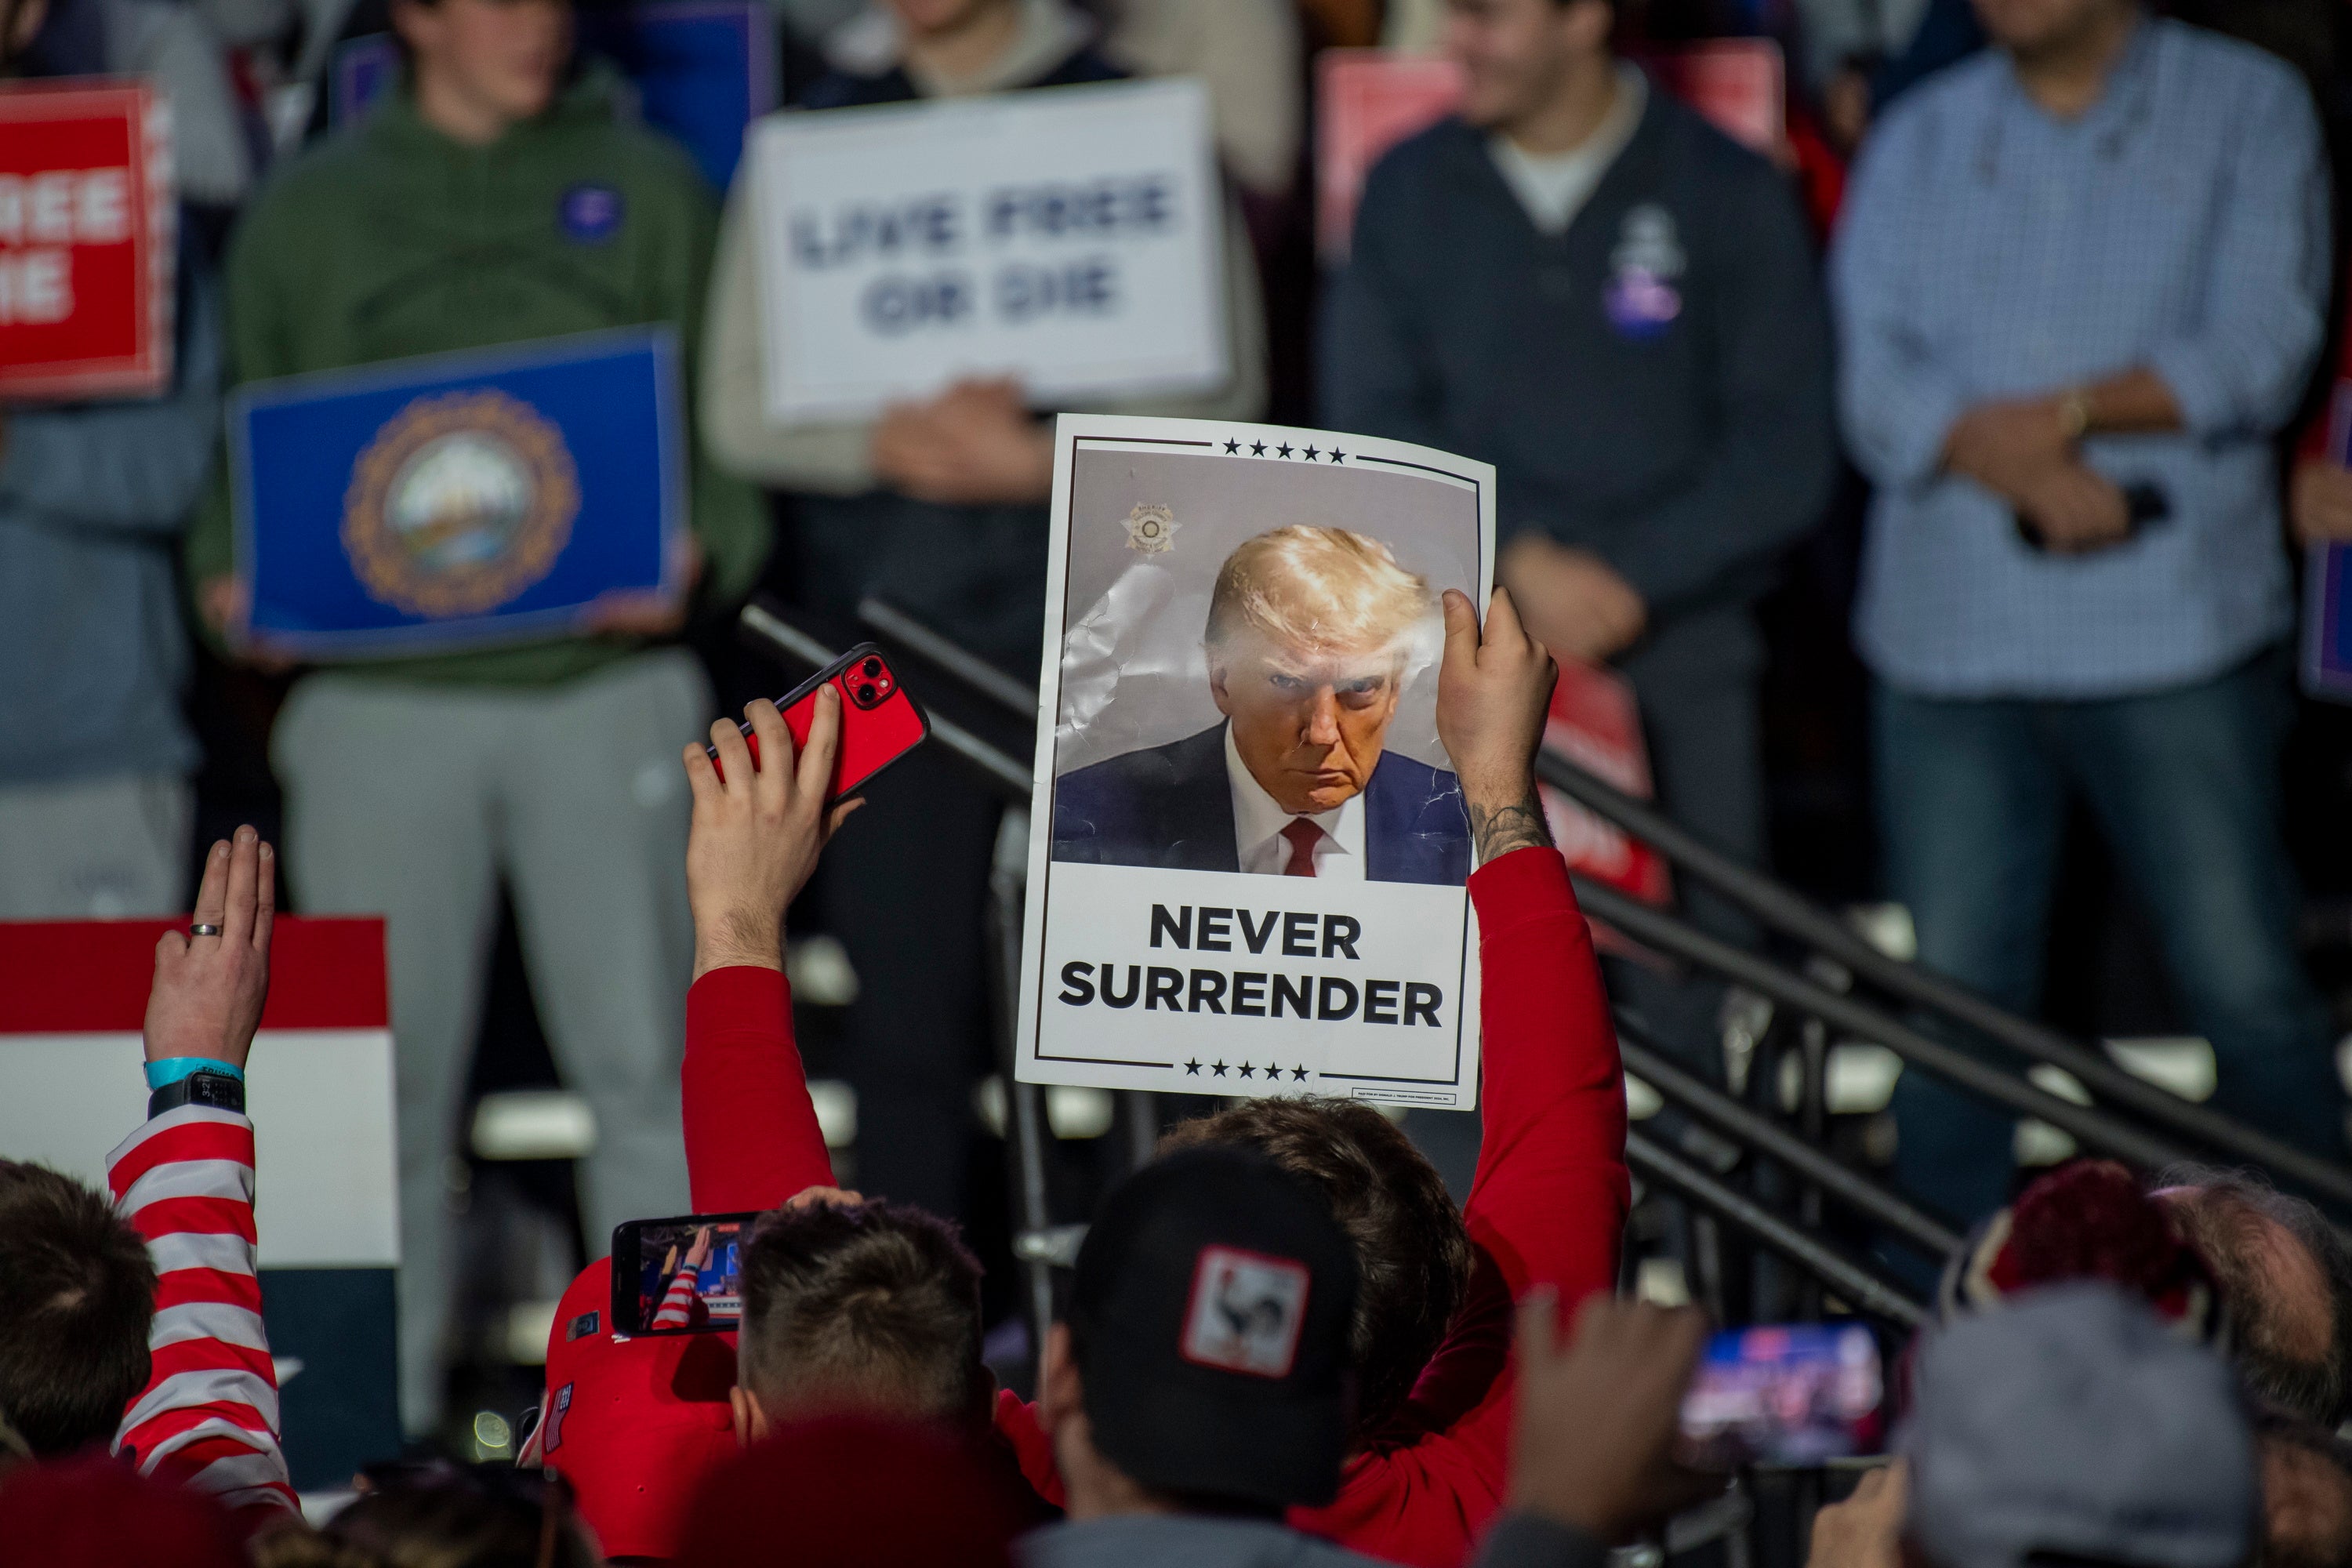 Donald Trump’s supporters in New Hampshire on 16 December hold a picture of his mugshot from criminal charges in Atlanta for an alleged scheme to overturn 2020 election results.